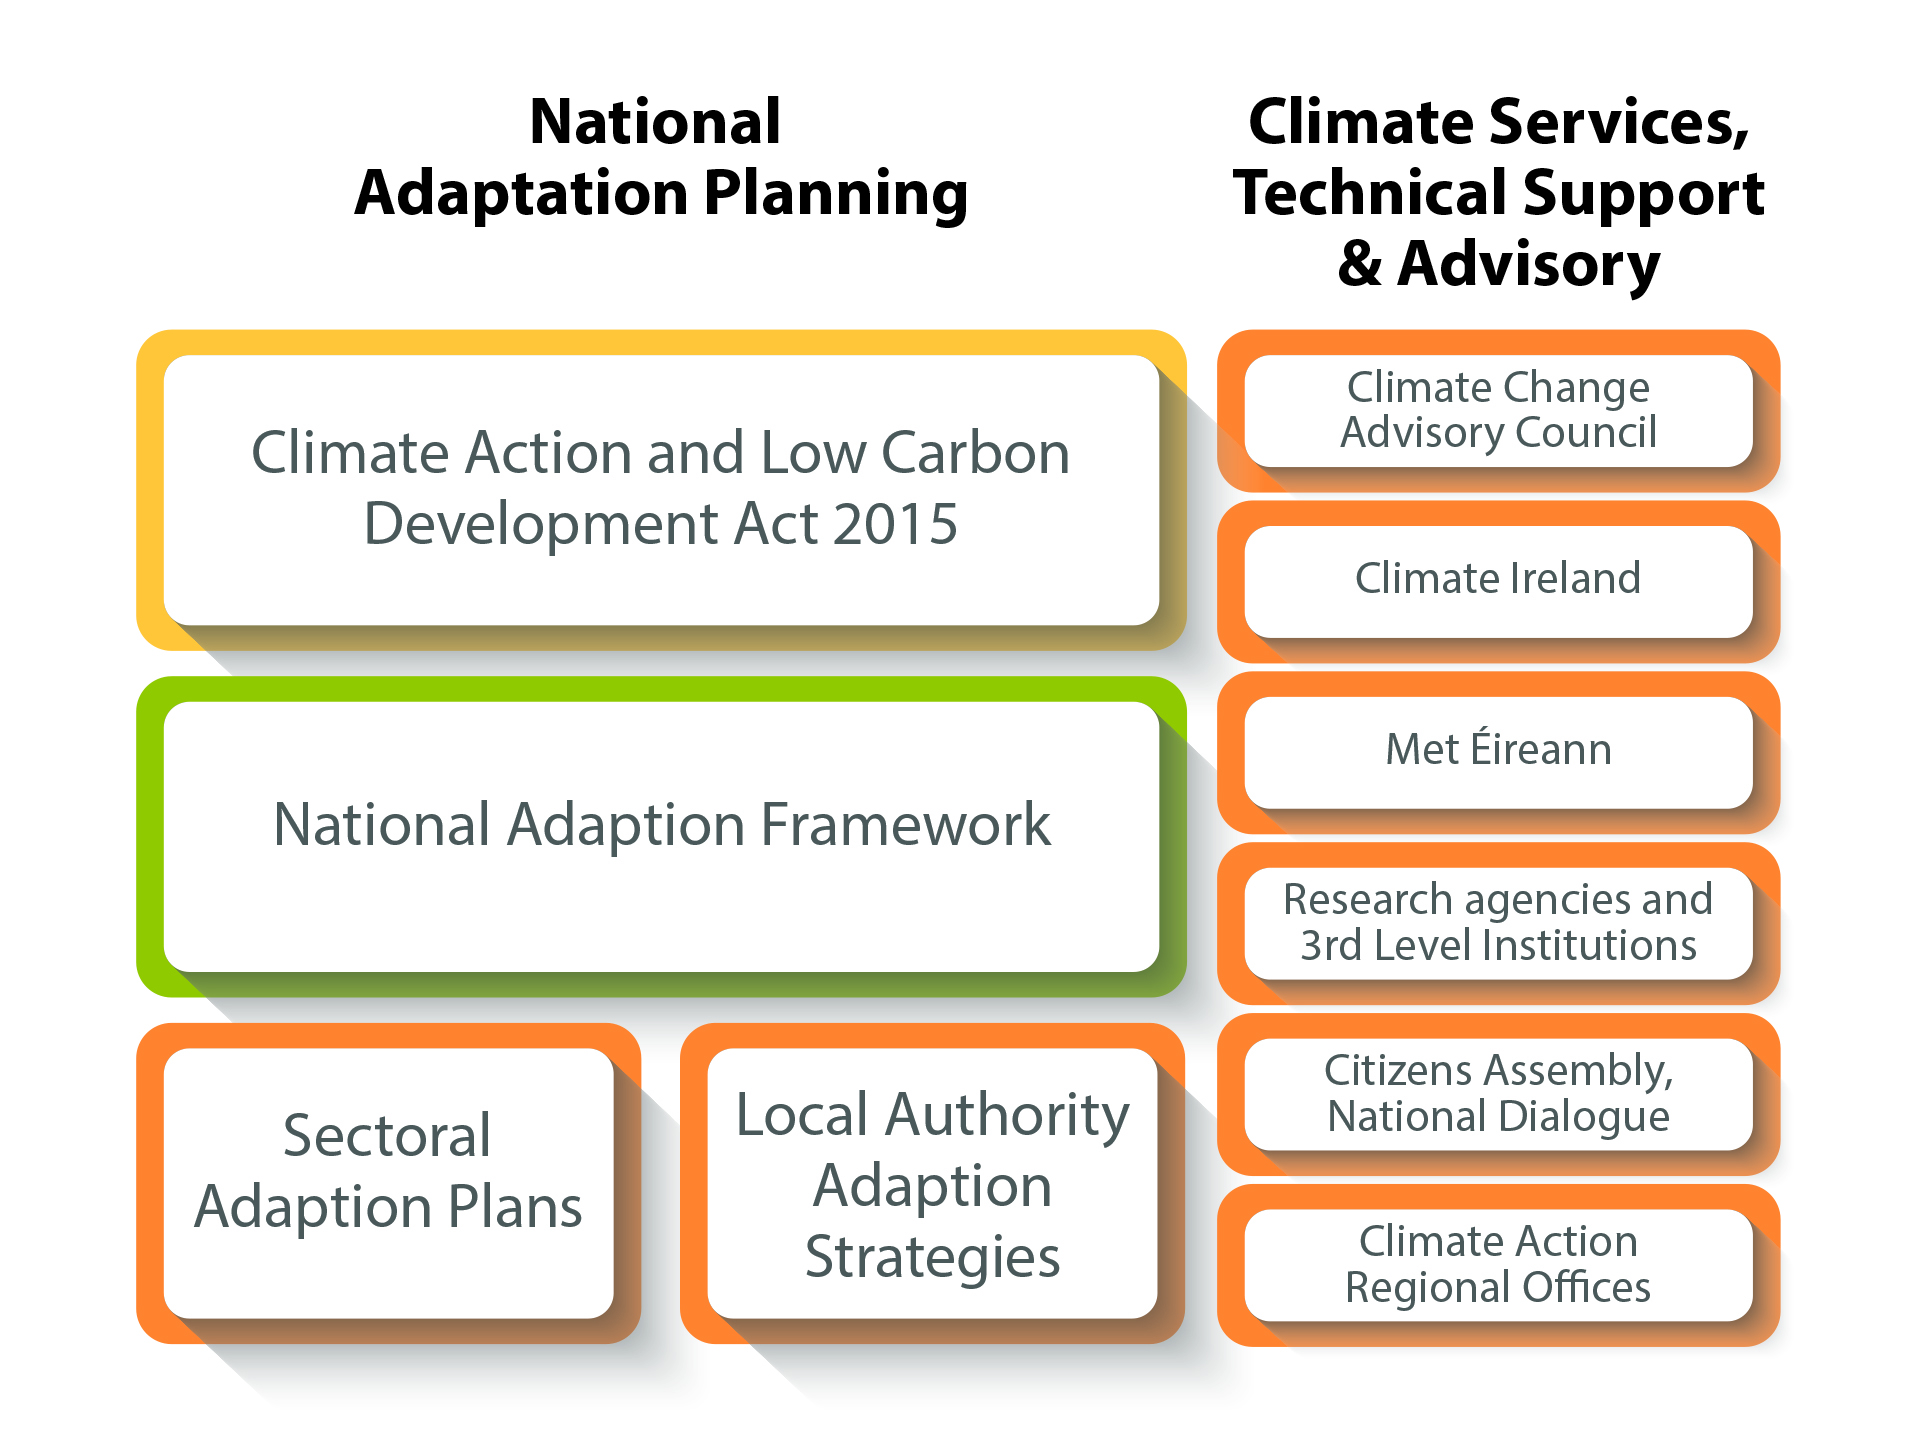 Figure 11.1: The National Policy Context for National Adaptation Plan